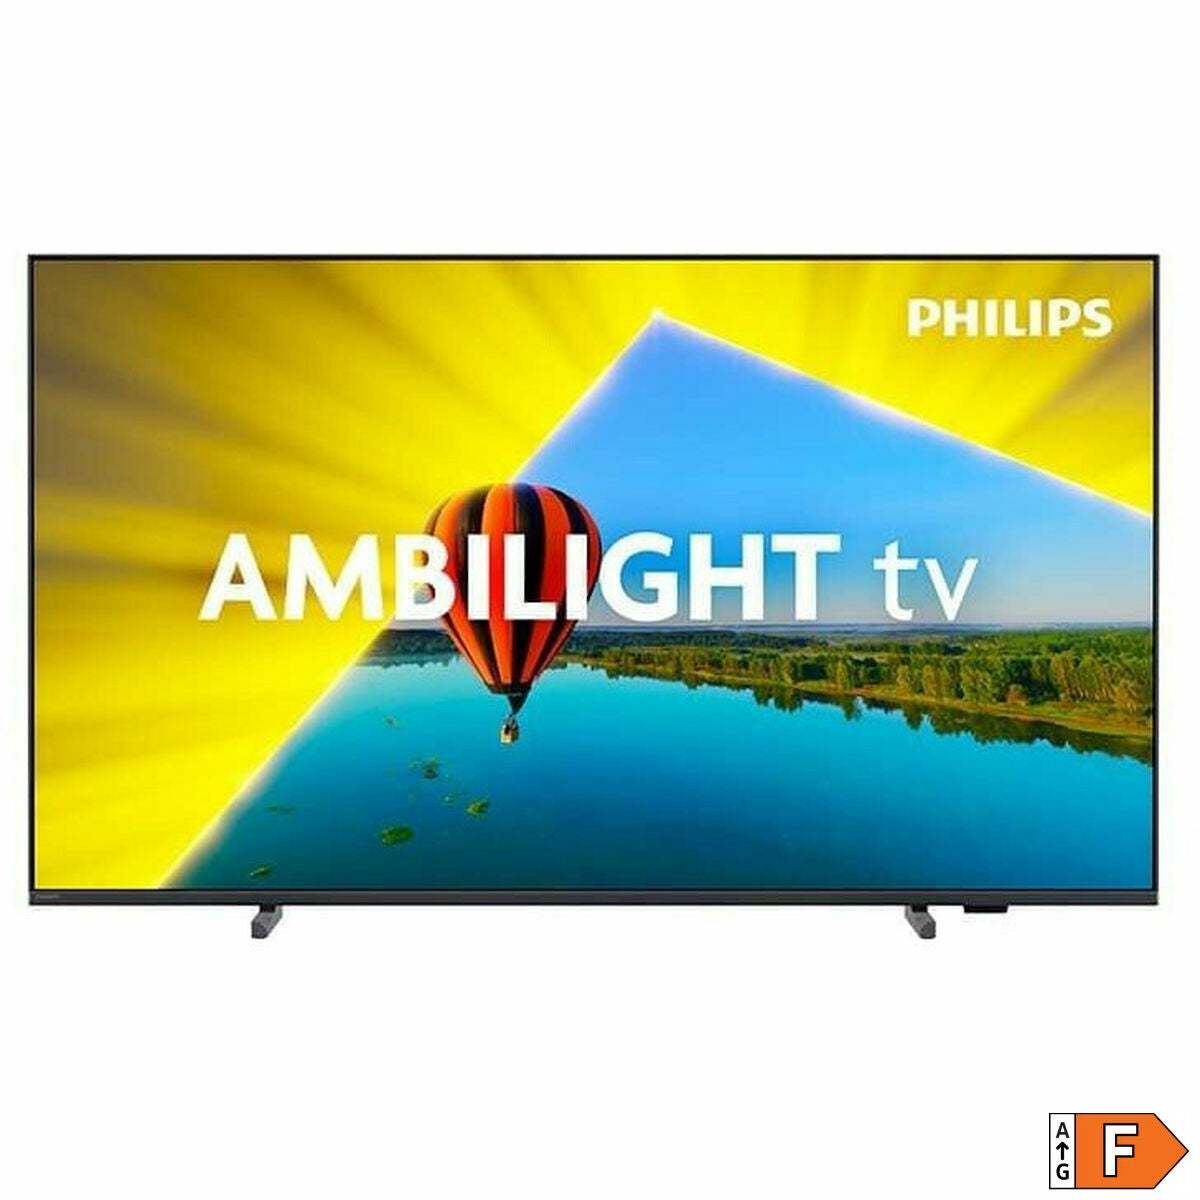 Smart TV Philips 55PUS8079 4K Ultra HD 55" LED, Philips, Electronics, TV, Video and home cinema, smart-tv-philips-55pus8079-4k-ultra-hd-55-led, Brand_Philips, category-reference-2609, category-reference-2625, category-reference-2931, category-reference-t-18805, category-reference-t-18827, category-reference-t-19653, cinema and television, Condition_NEW, entertainment, Price_500 - 600, RiotNook